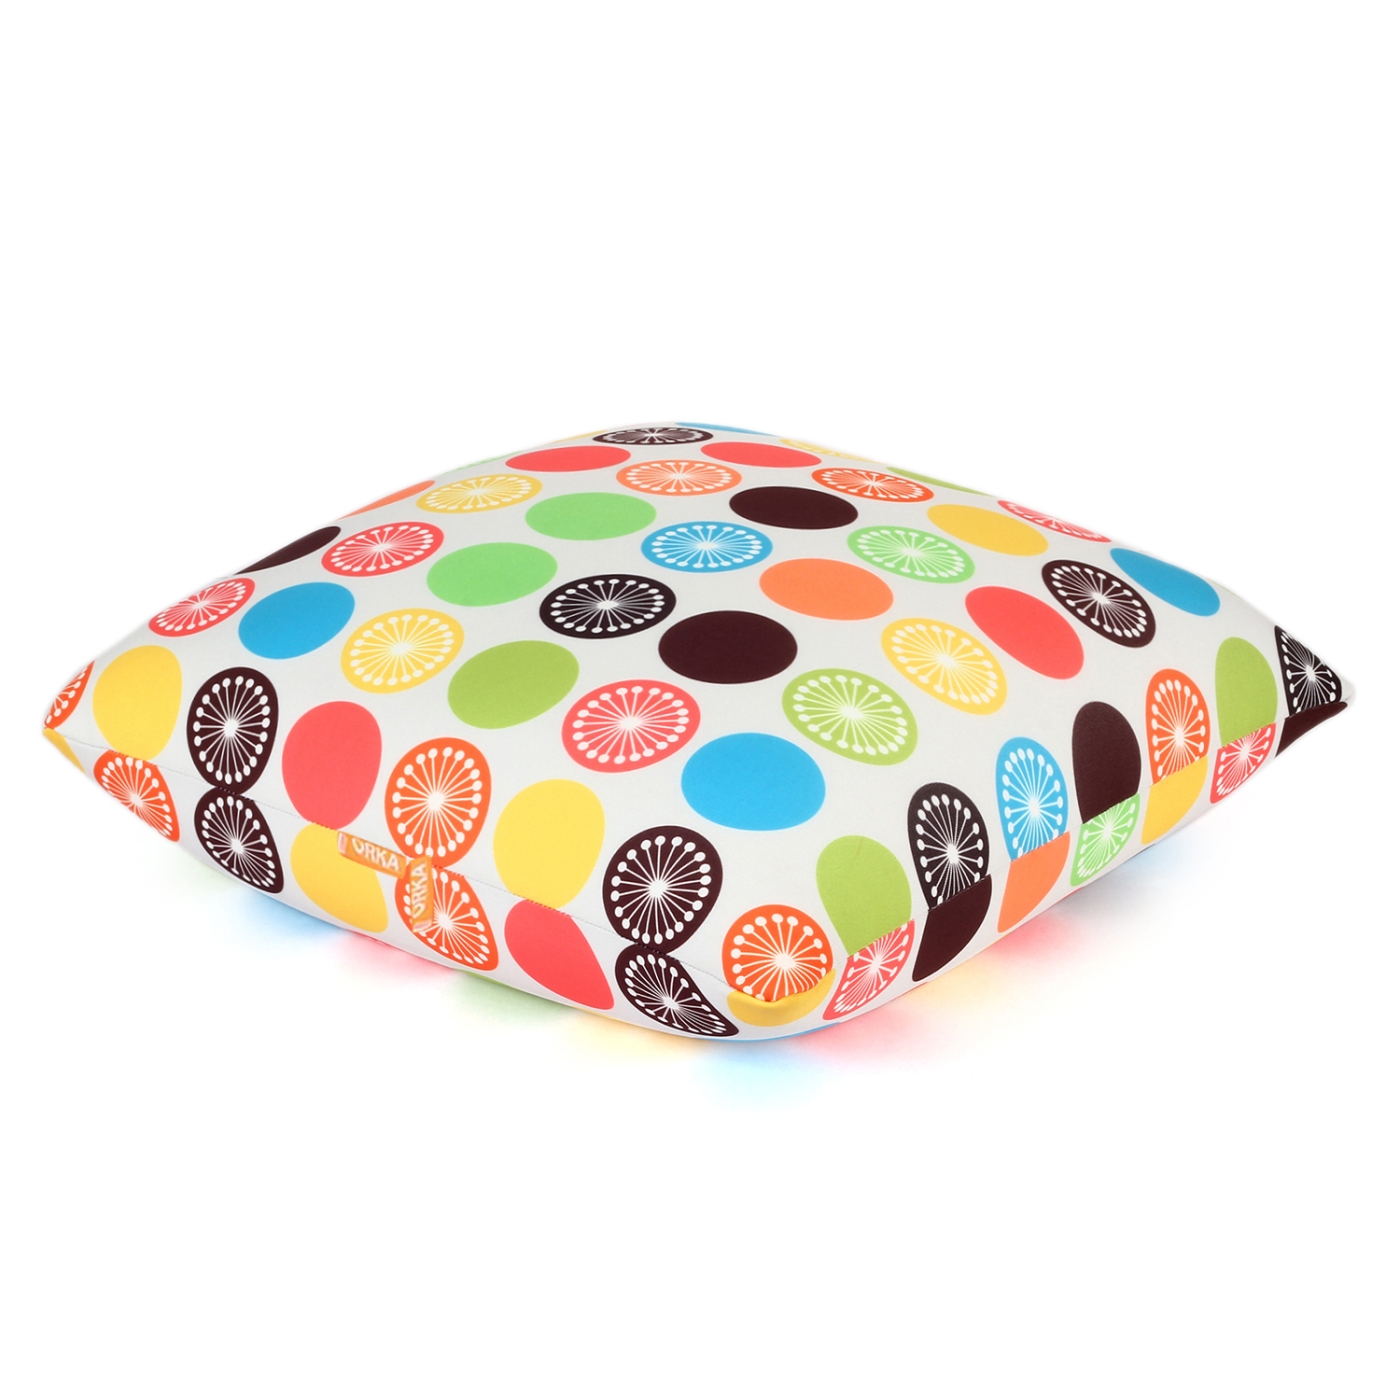 ORKA Digital Printed Design 2 Spandex Filled With Microbeads Square Cushion 14 X 14 Inch - Multicolor  